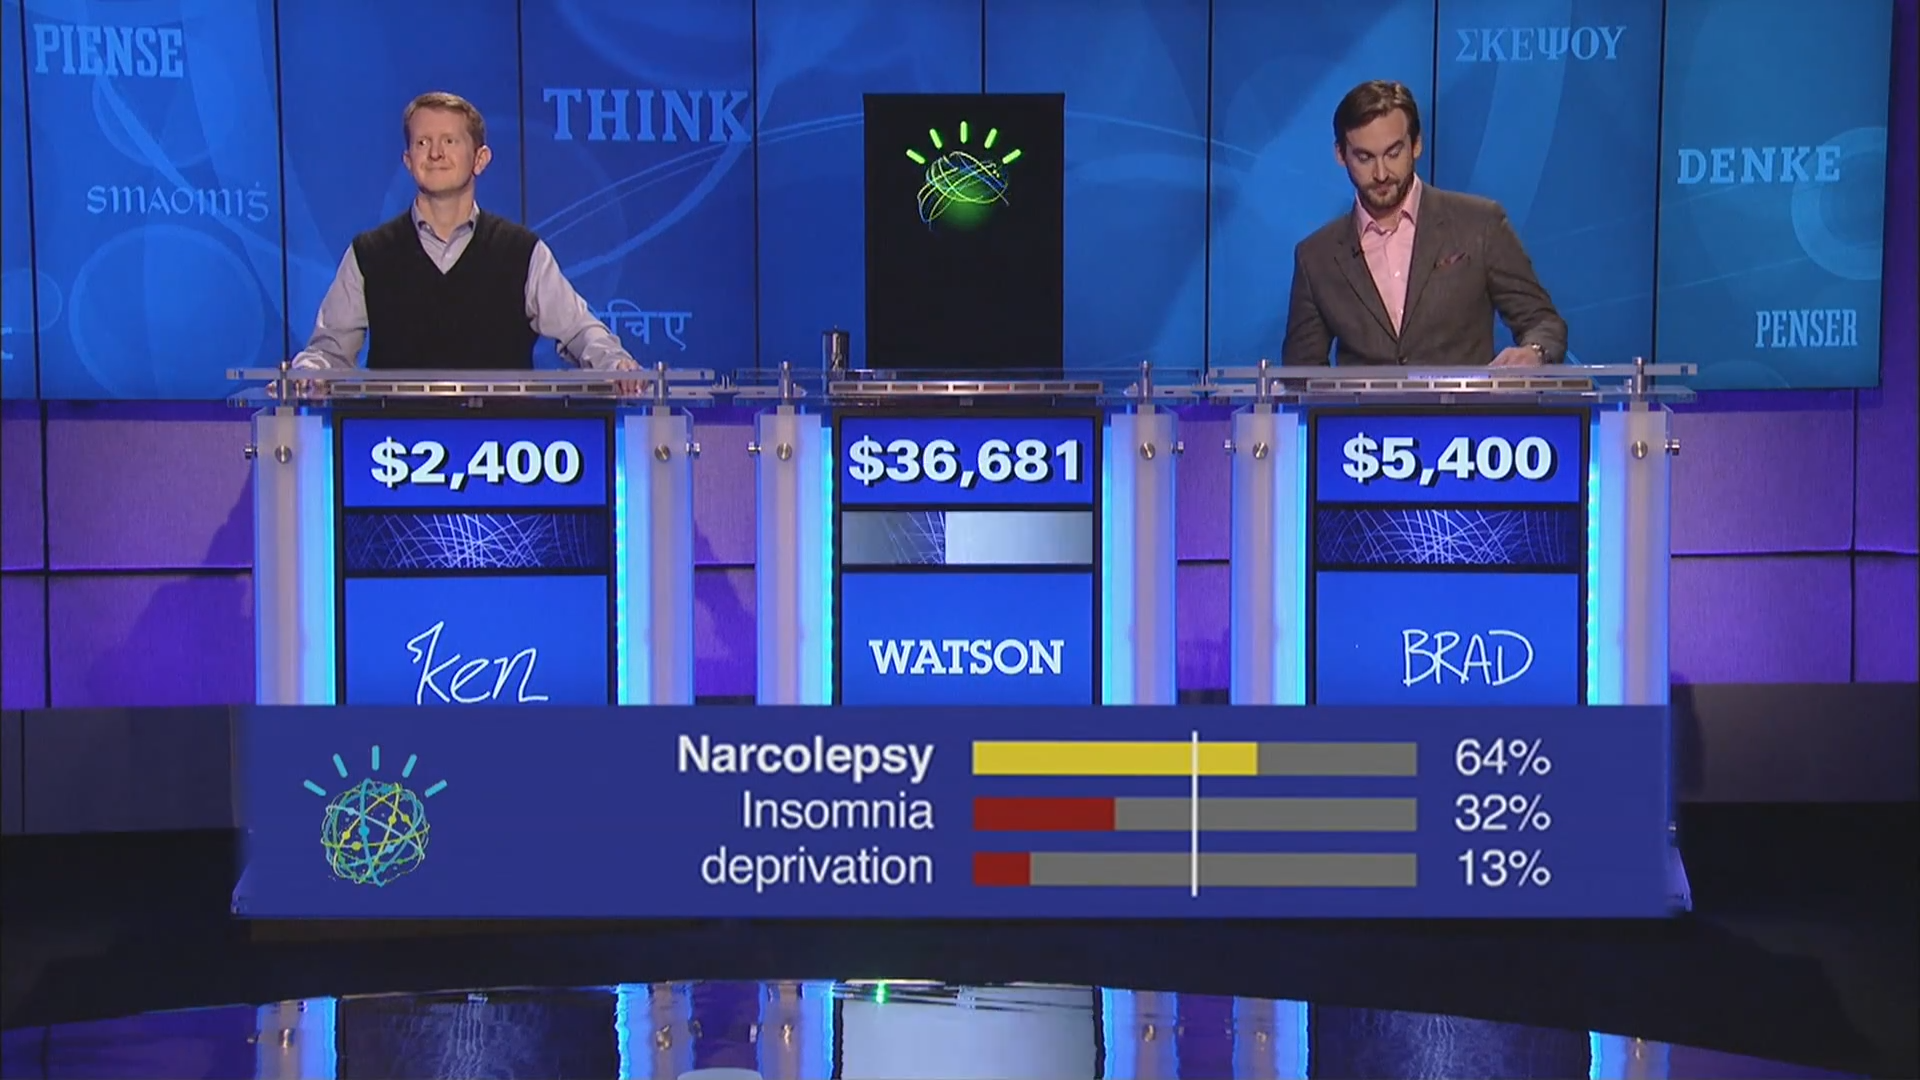 Two 'Jeopardy!' champions, Ken Jennings, left, and Brad Rutter, competed against IBM's Watson supercomputer, which proved adept at buzzing in quickly, as bouts were taped at the IBM research center in Yorktown Heights, New York, and February 14, 2011 was the broadcasting date of the first episode.